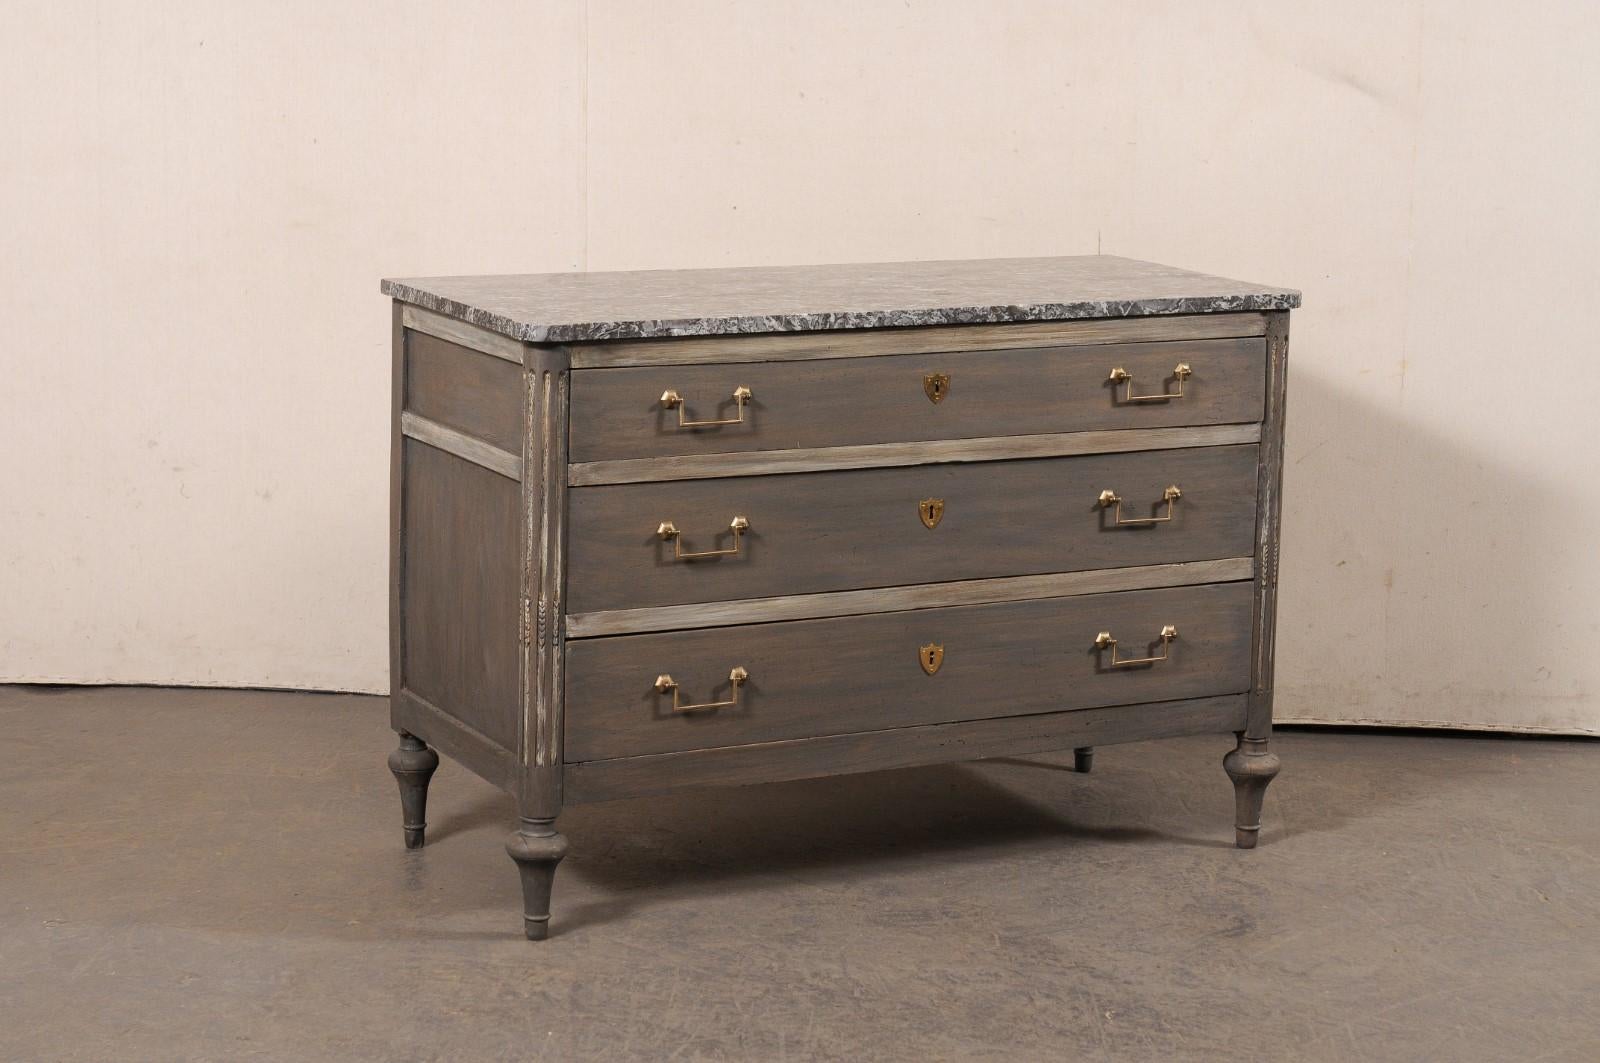 A Neoclassical French carved and painted wood commode, with original marble top, from the 19th century. This antique chest from France features its original marble top with rounded front corners and a subtle reverse breakfront design, atop a